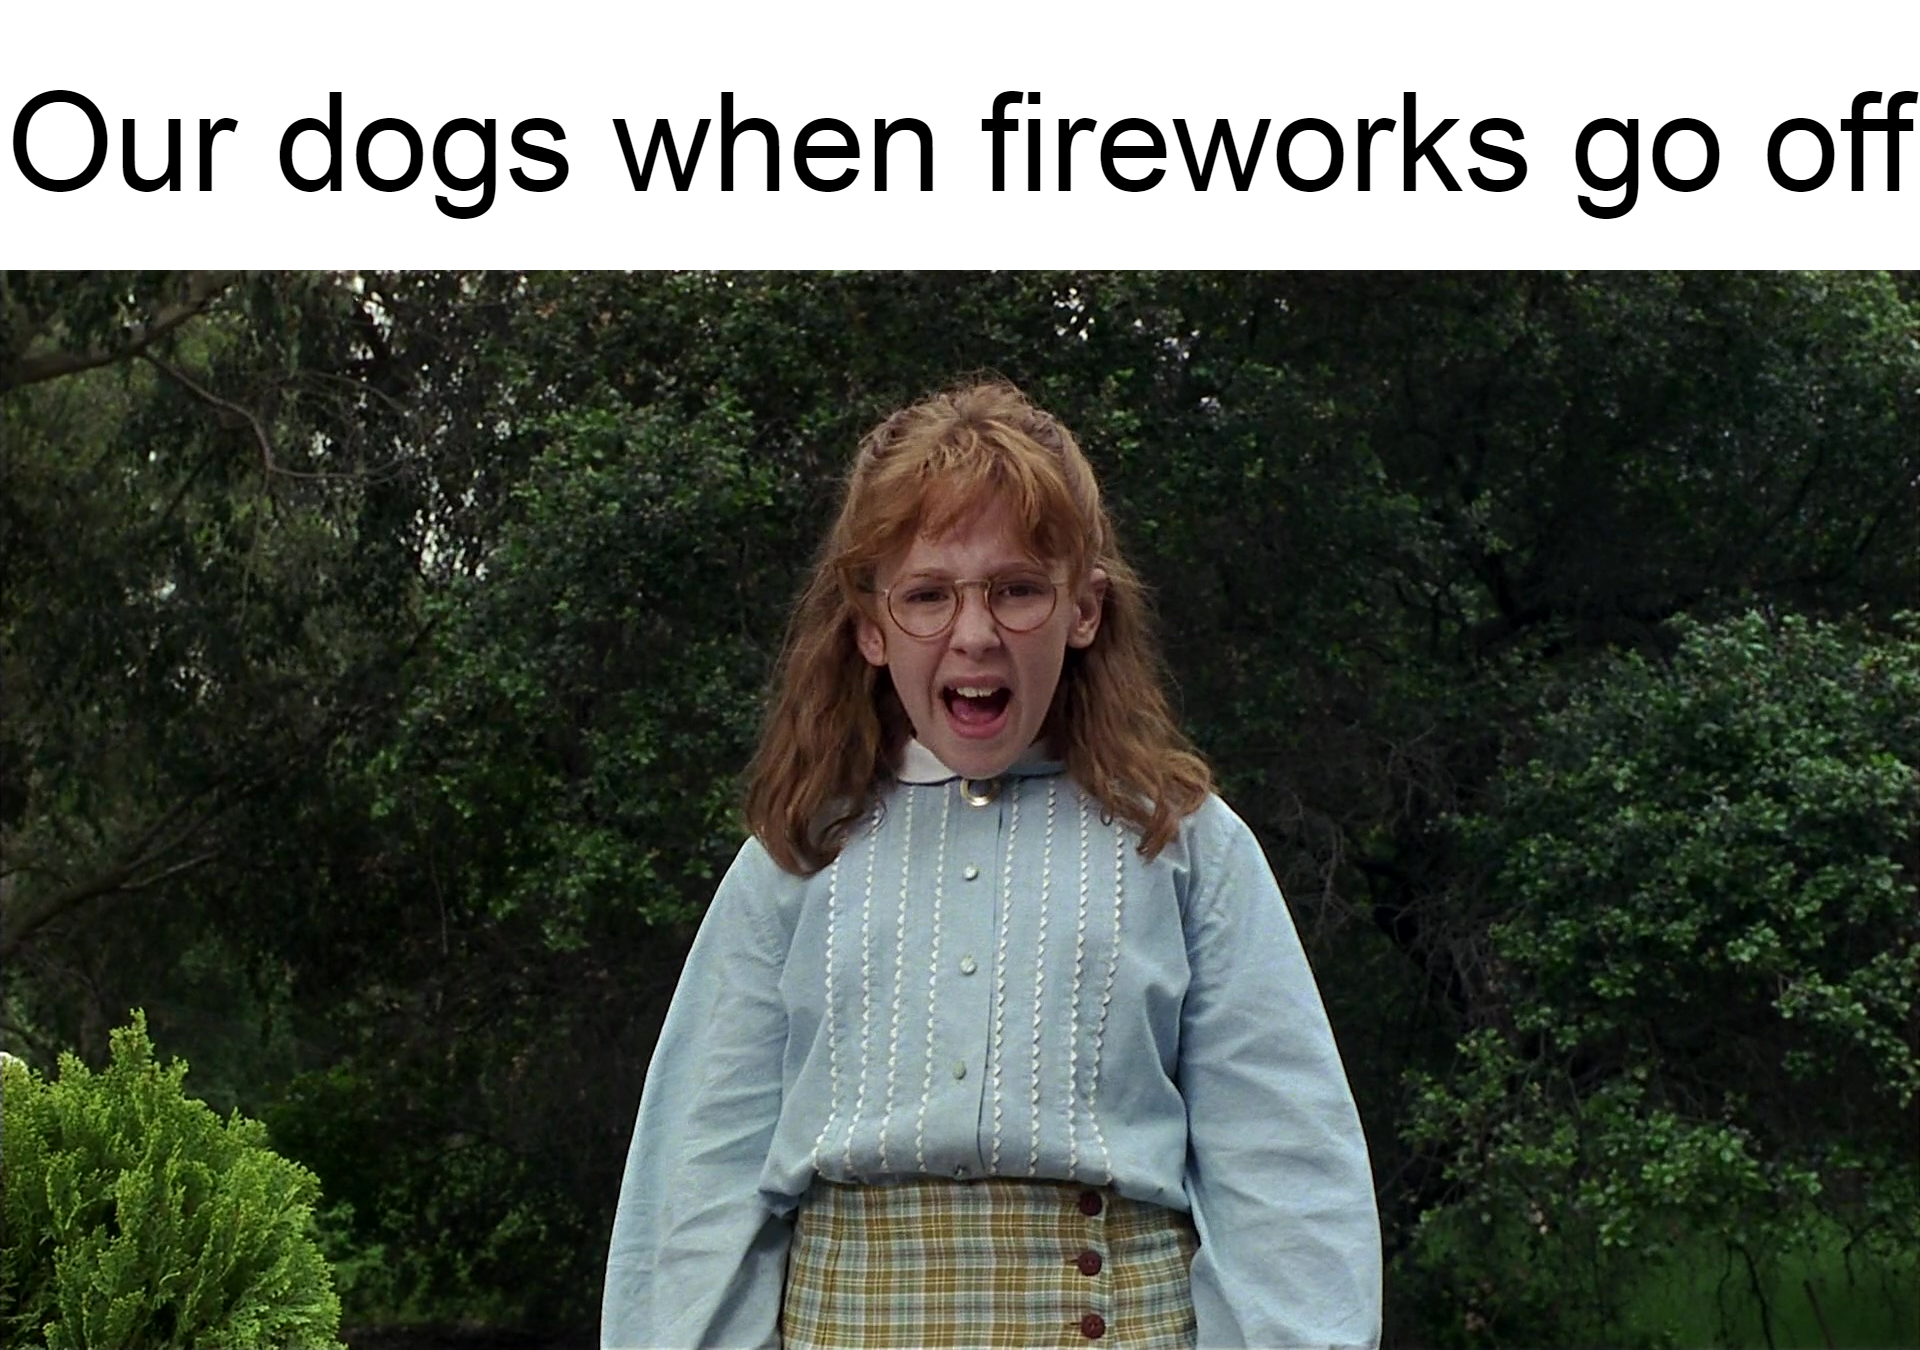 monday morning randomness - girl - Our dogs when fireworks go off